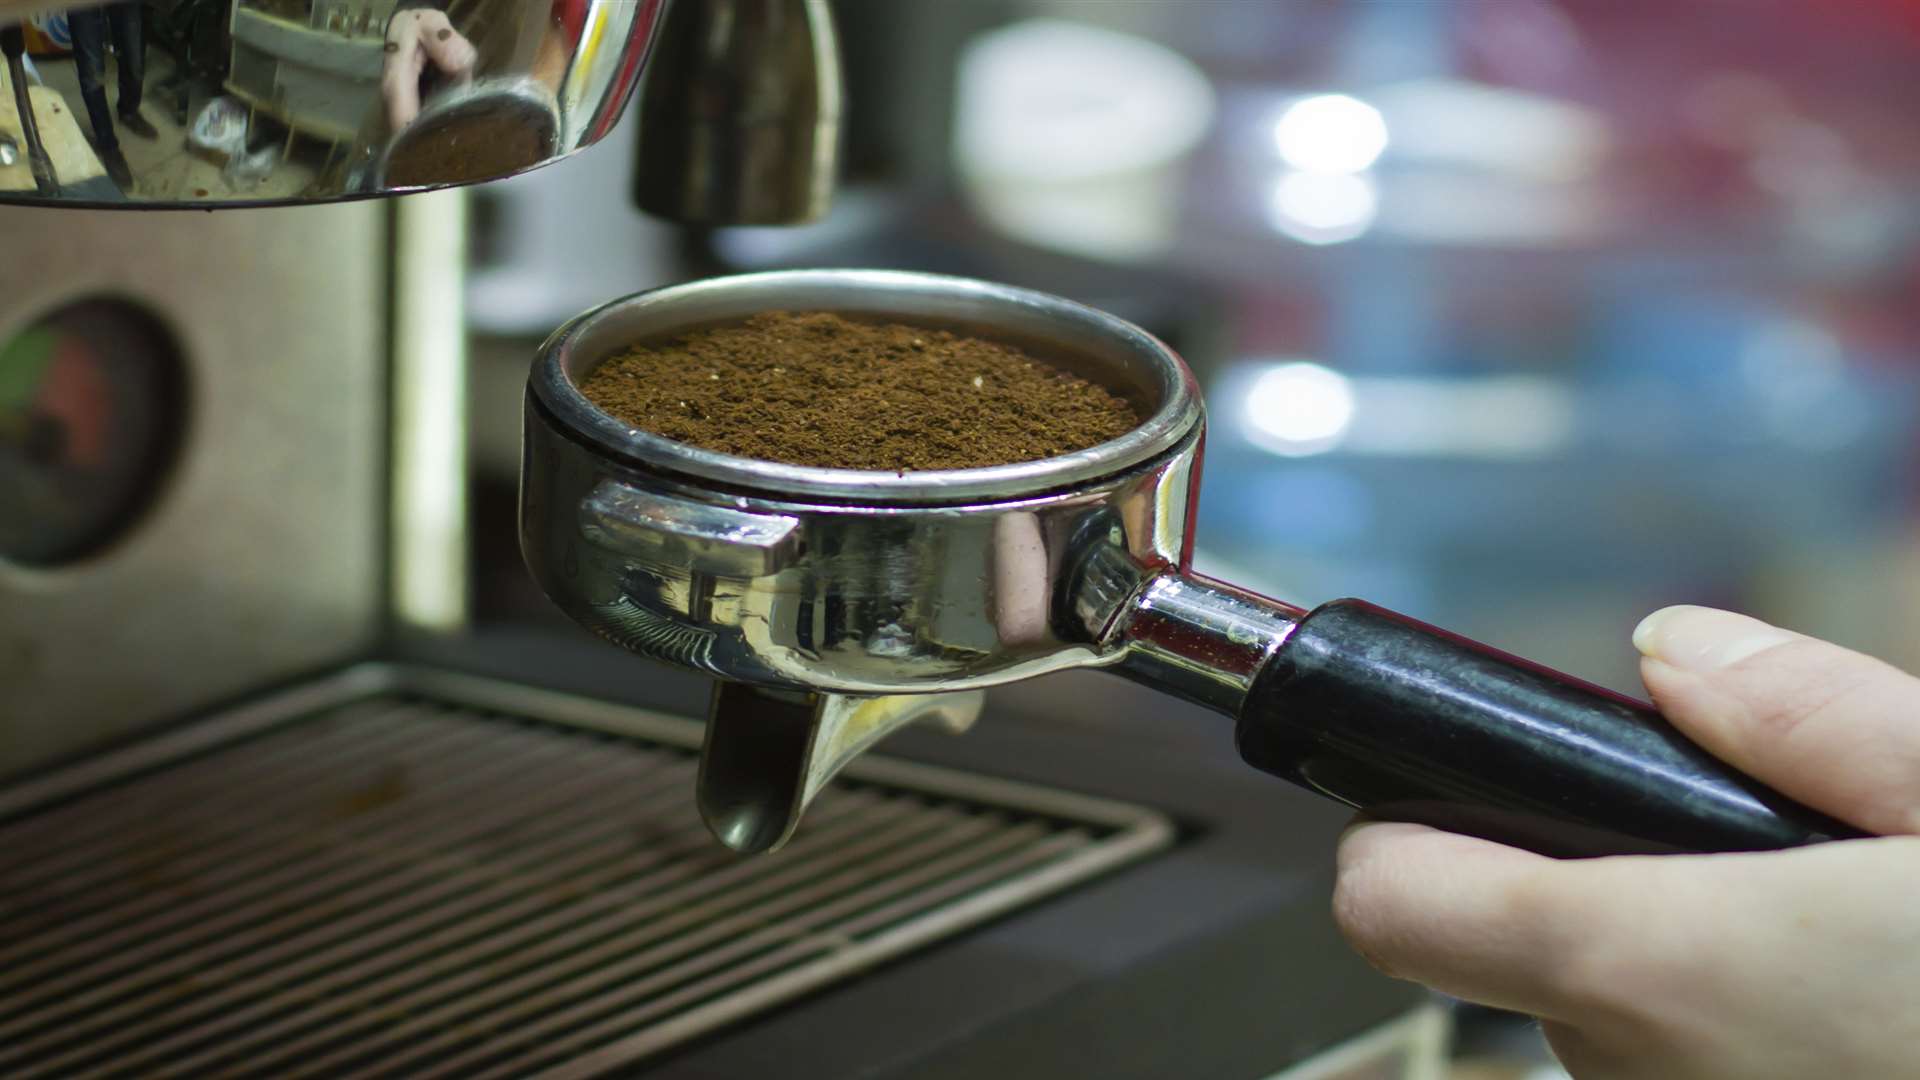 Two coffee shops are opening up in Sittingbourne. Picture: Thinkstock Image Library